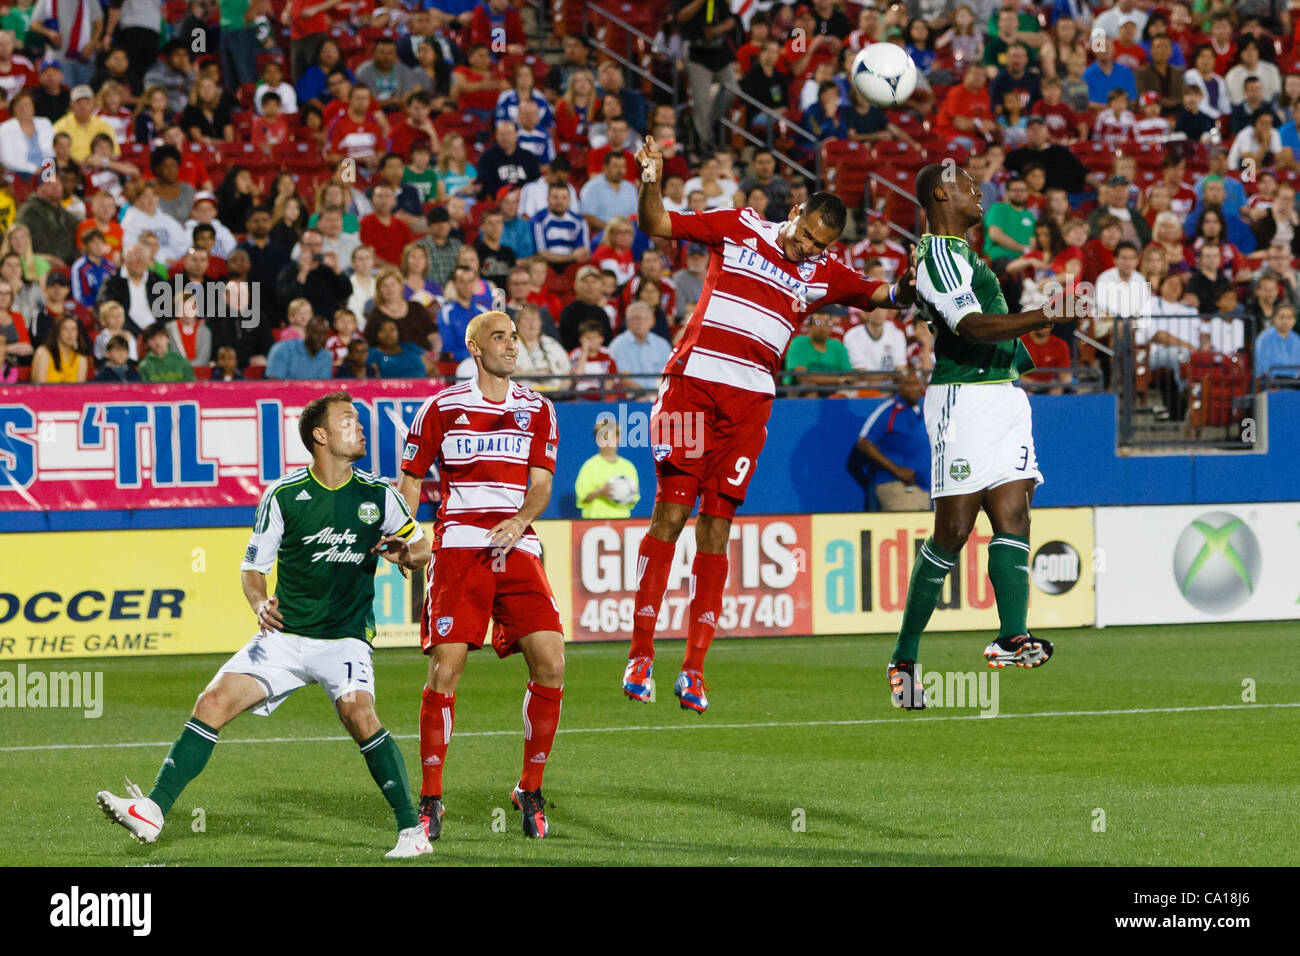 March 17, 2012 - Frisco, Texas, US - FC Dallas forward Blas Perez (9) and Portland Timbers defender Hanyer Mosquera (33) of Colombia battle for a header during action between FC Dallas and Portland Timbers.  FC Dallas and Portland draw their match 1-1 at FC Dallas Stadium. (Credit Image: © Andrew Di Stock Photo